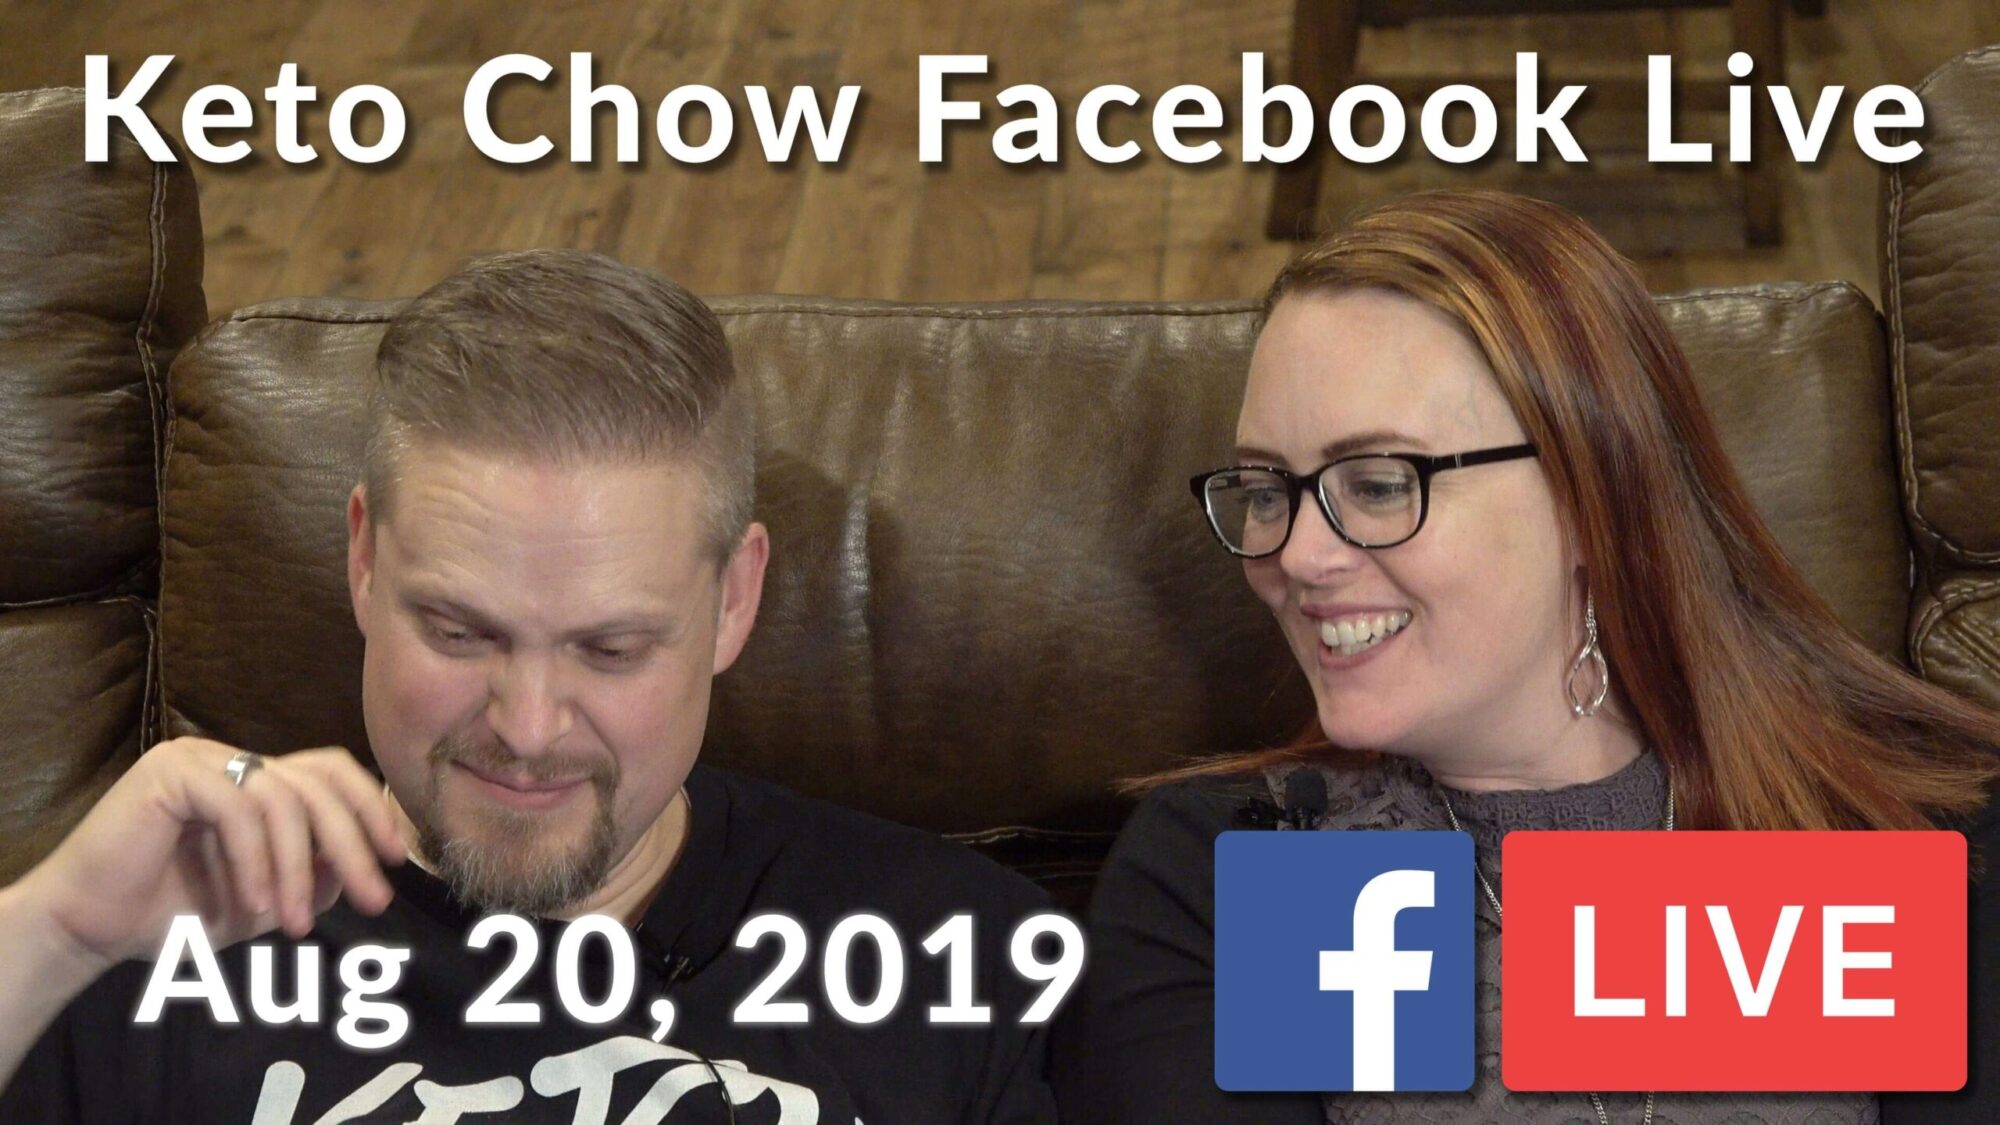 Keto Chow Facebook Live for August 20